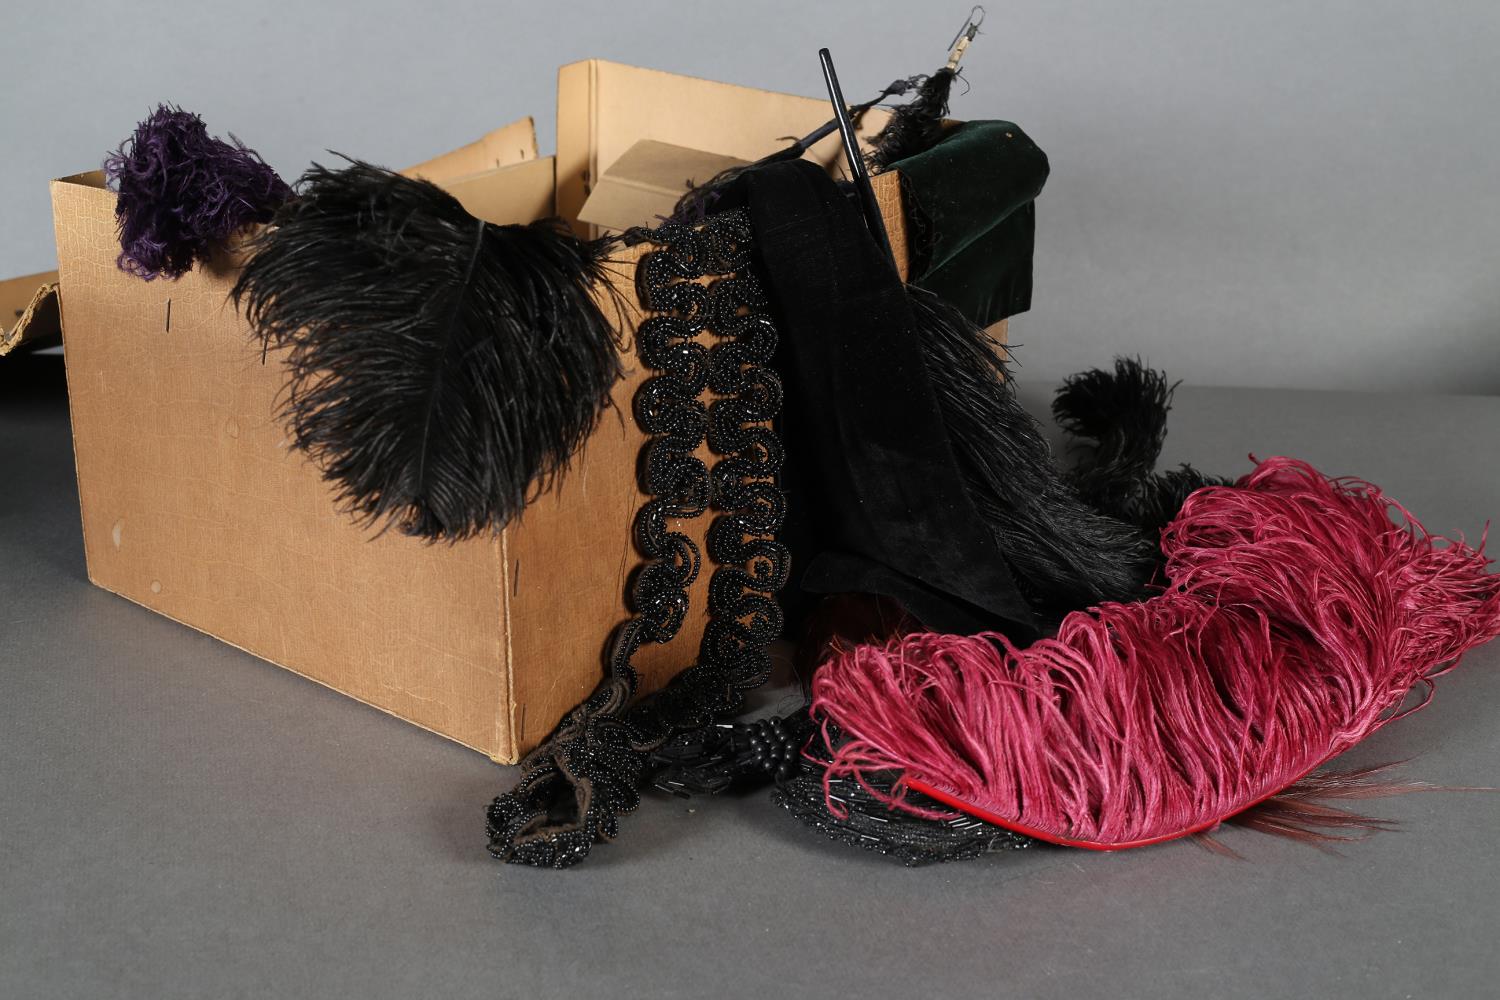 Funeral director's horse trims including black and purple ostrich feathers and black velvet trims,